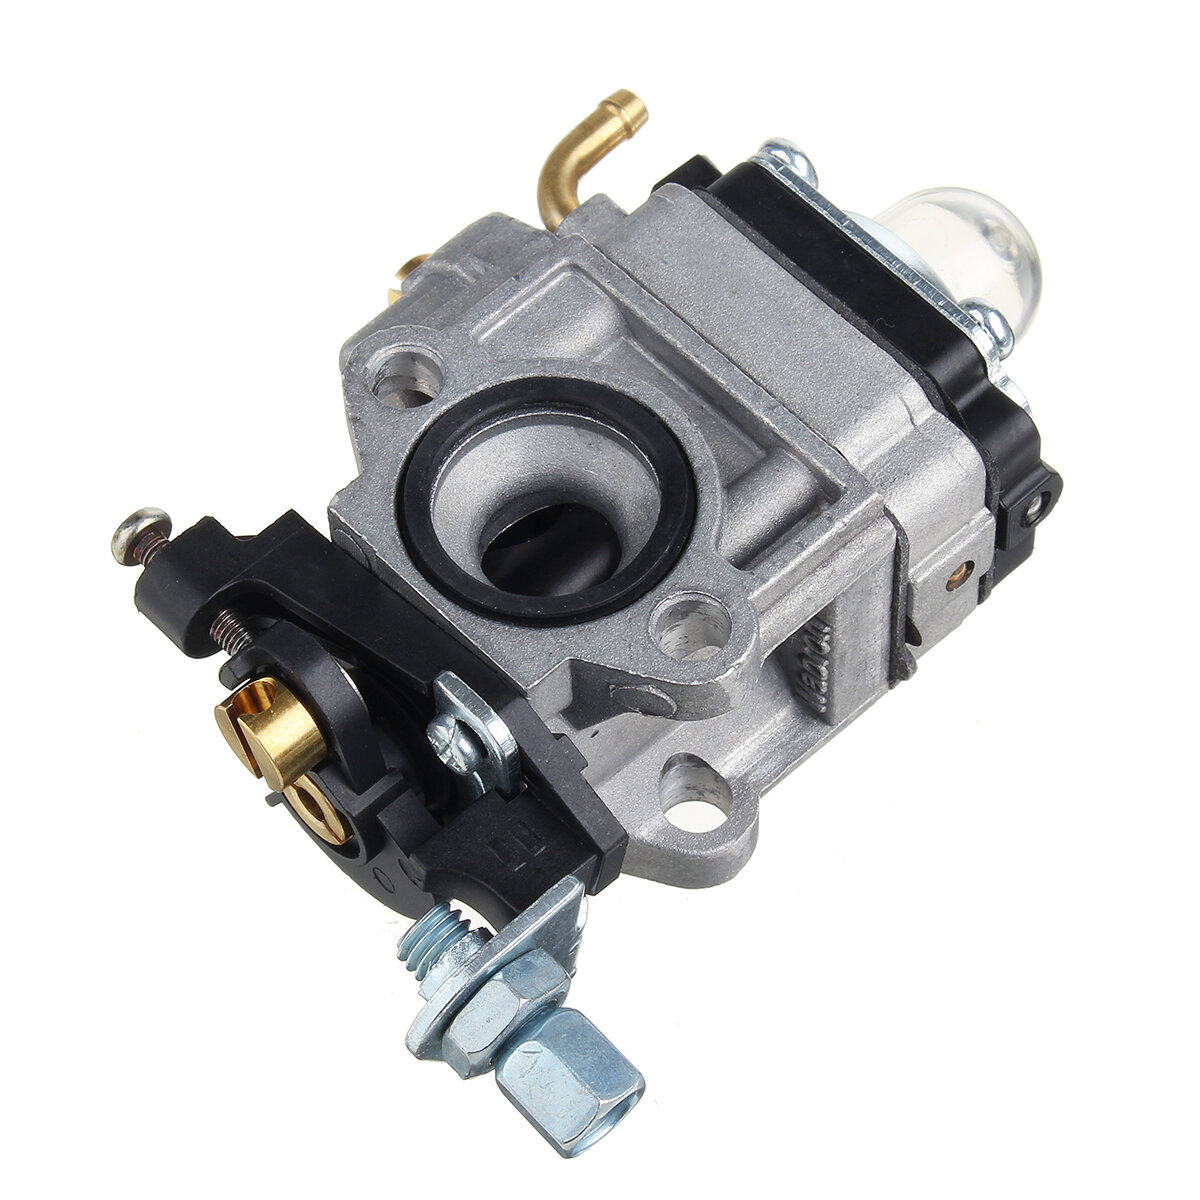 2-Stroke Carb Carburetor For Pocket Bike, ATVs, Stand-up Scooters, Dirt Bikes, Mini-Choppers